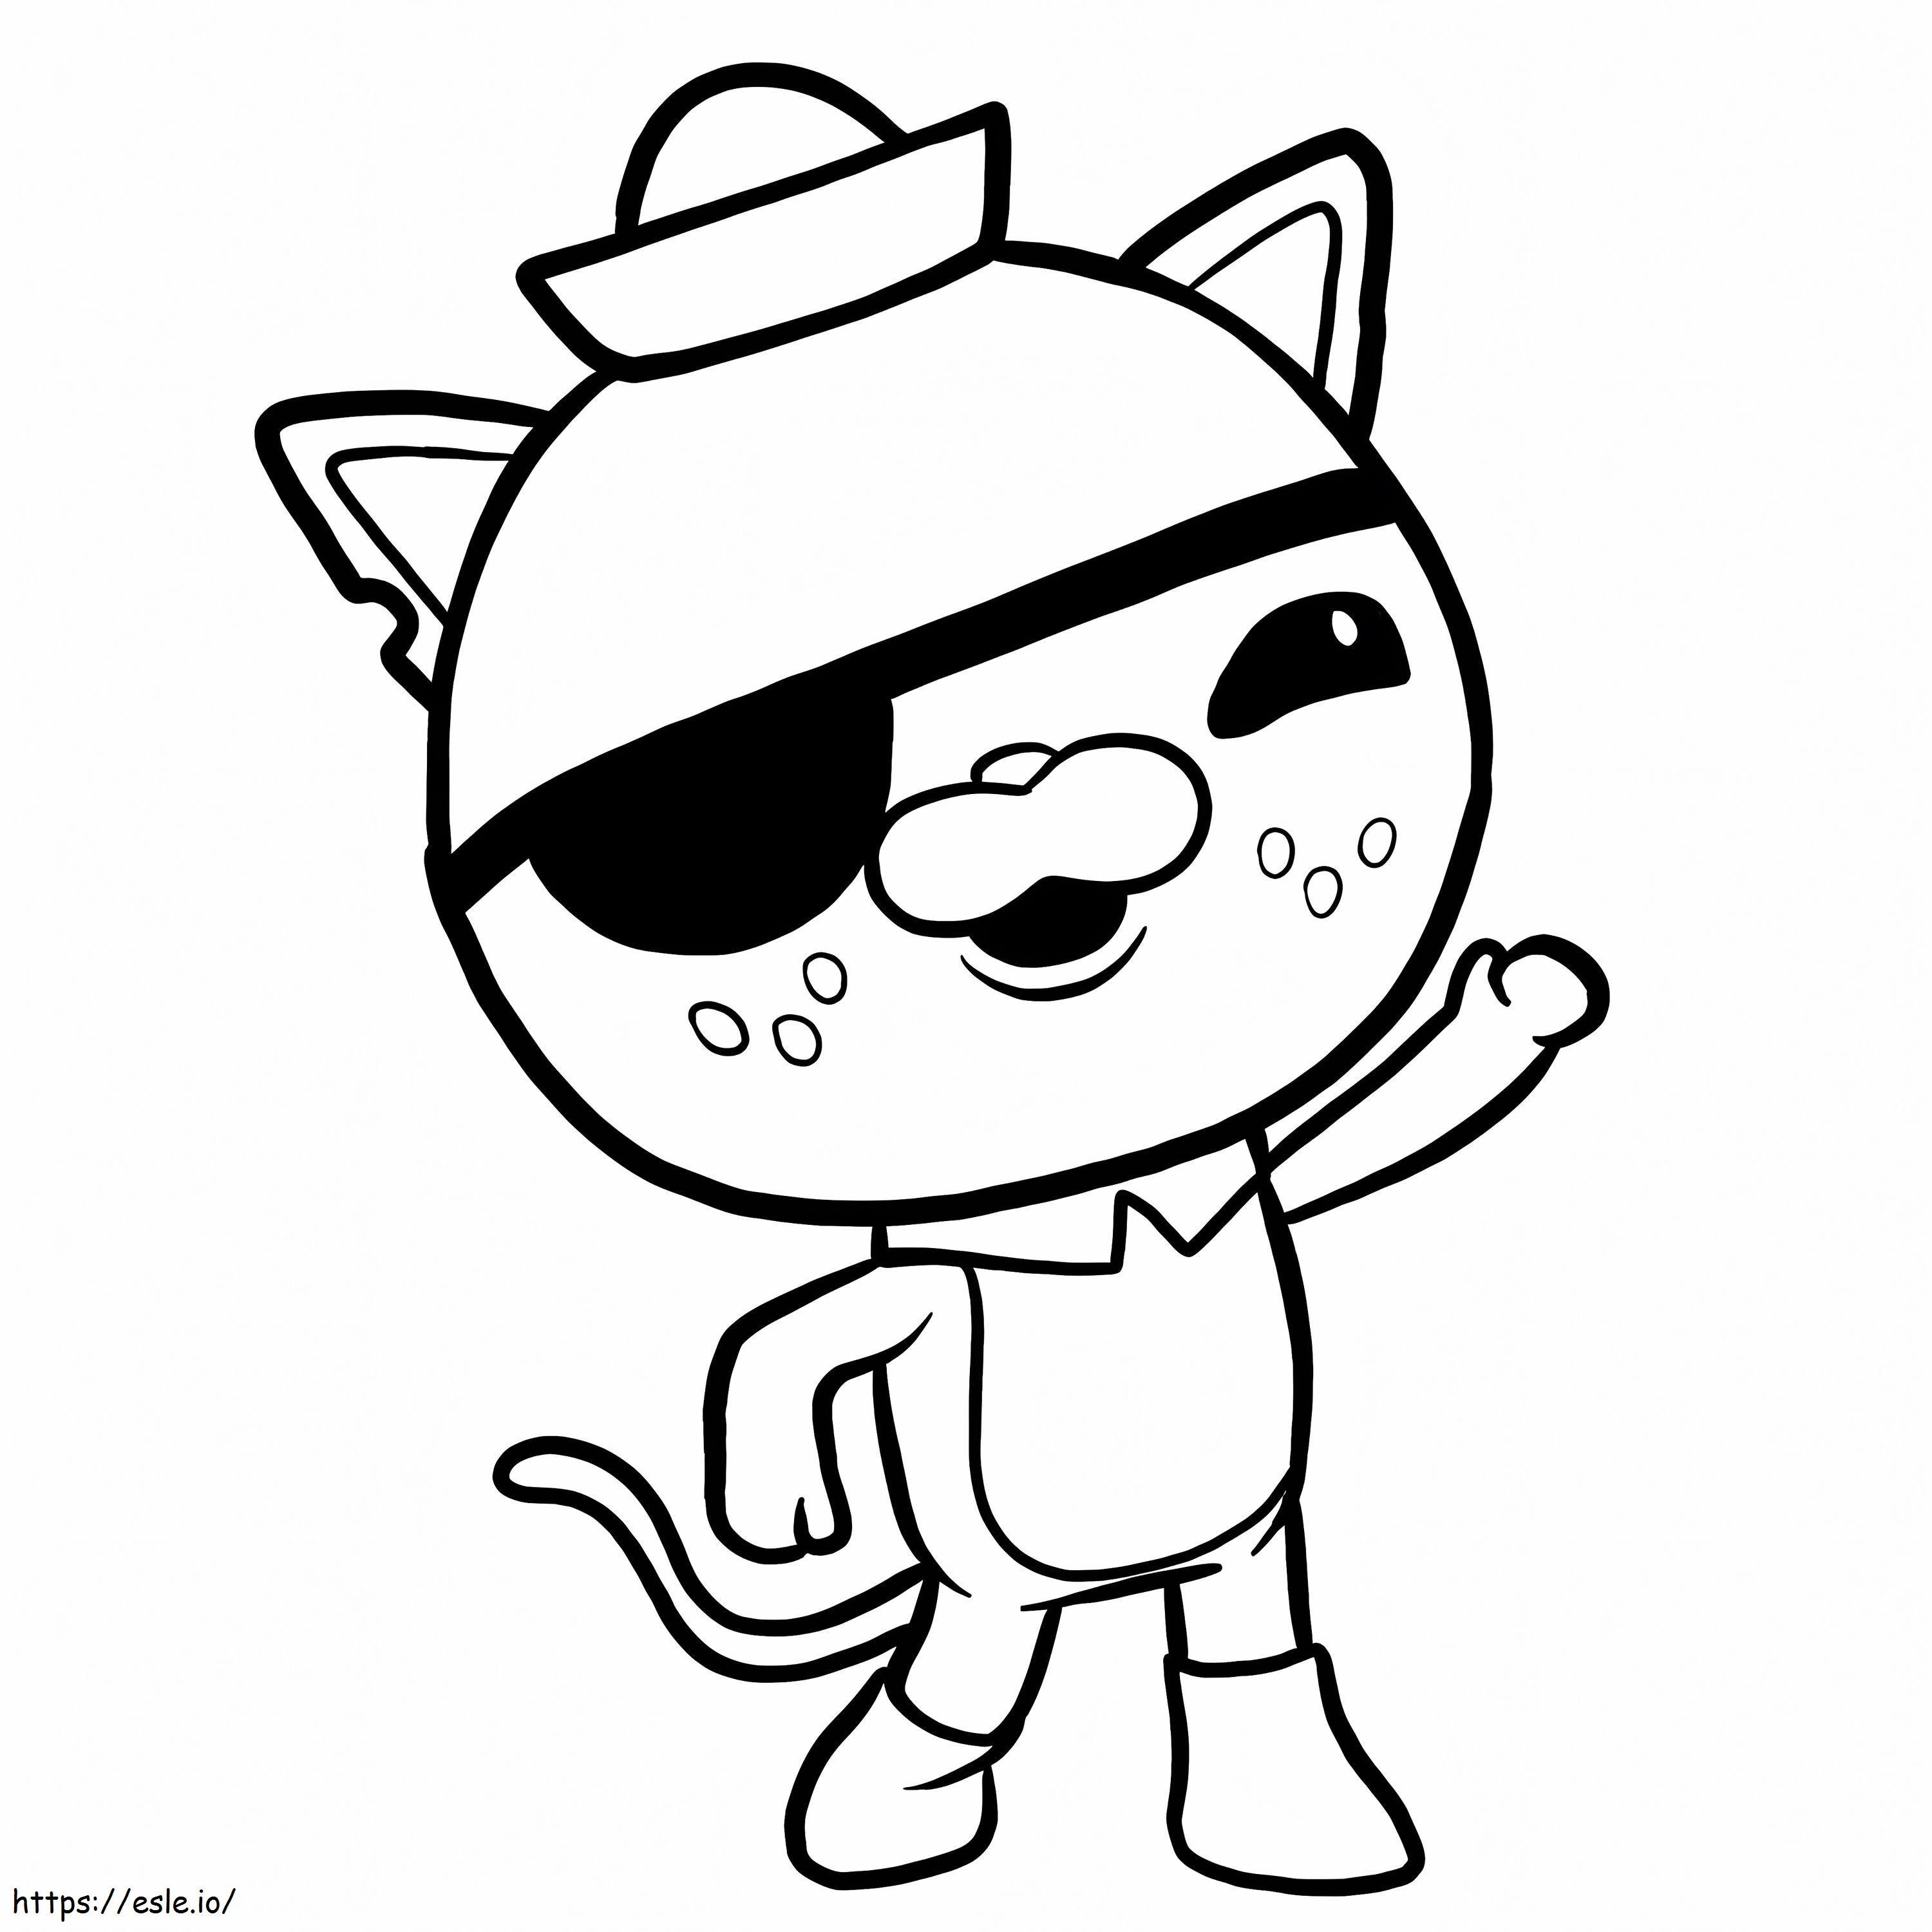 Funny Kwazii coloring page